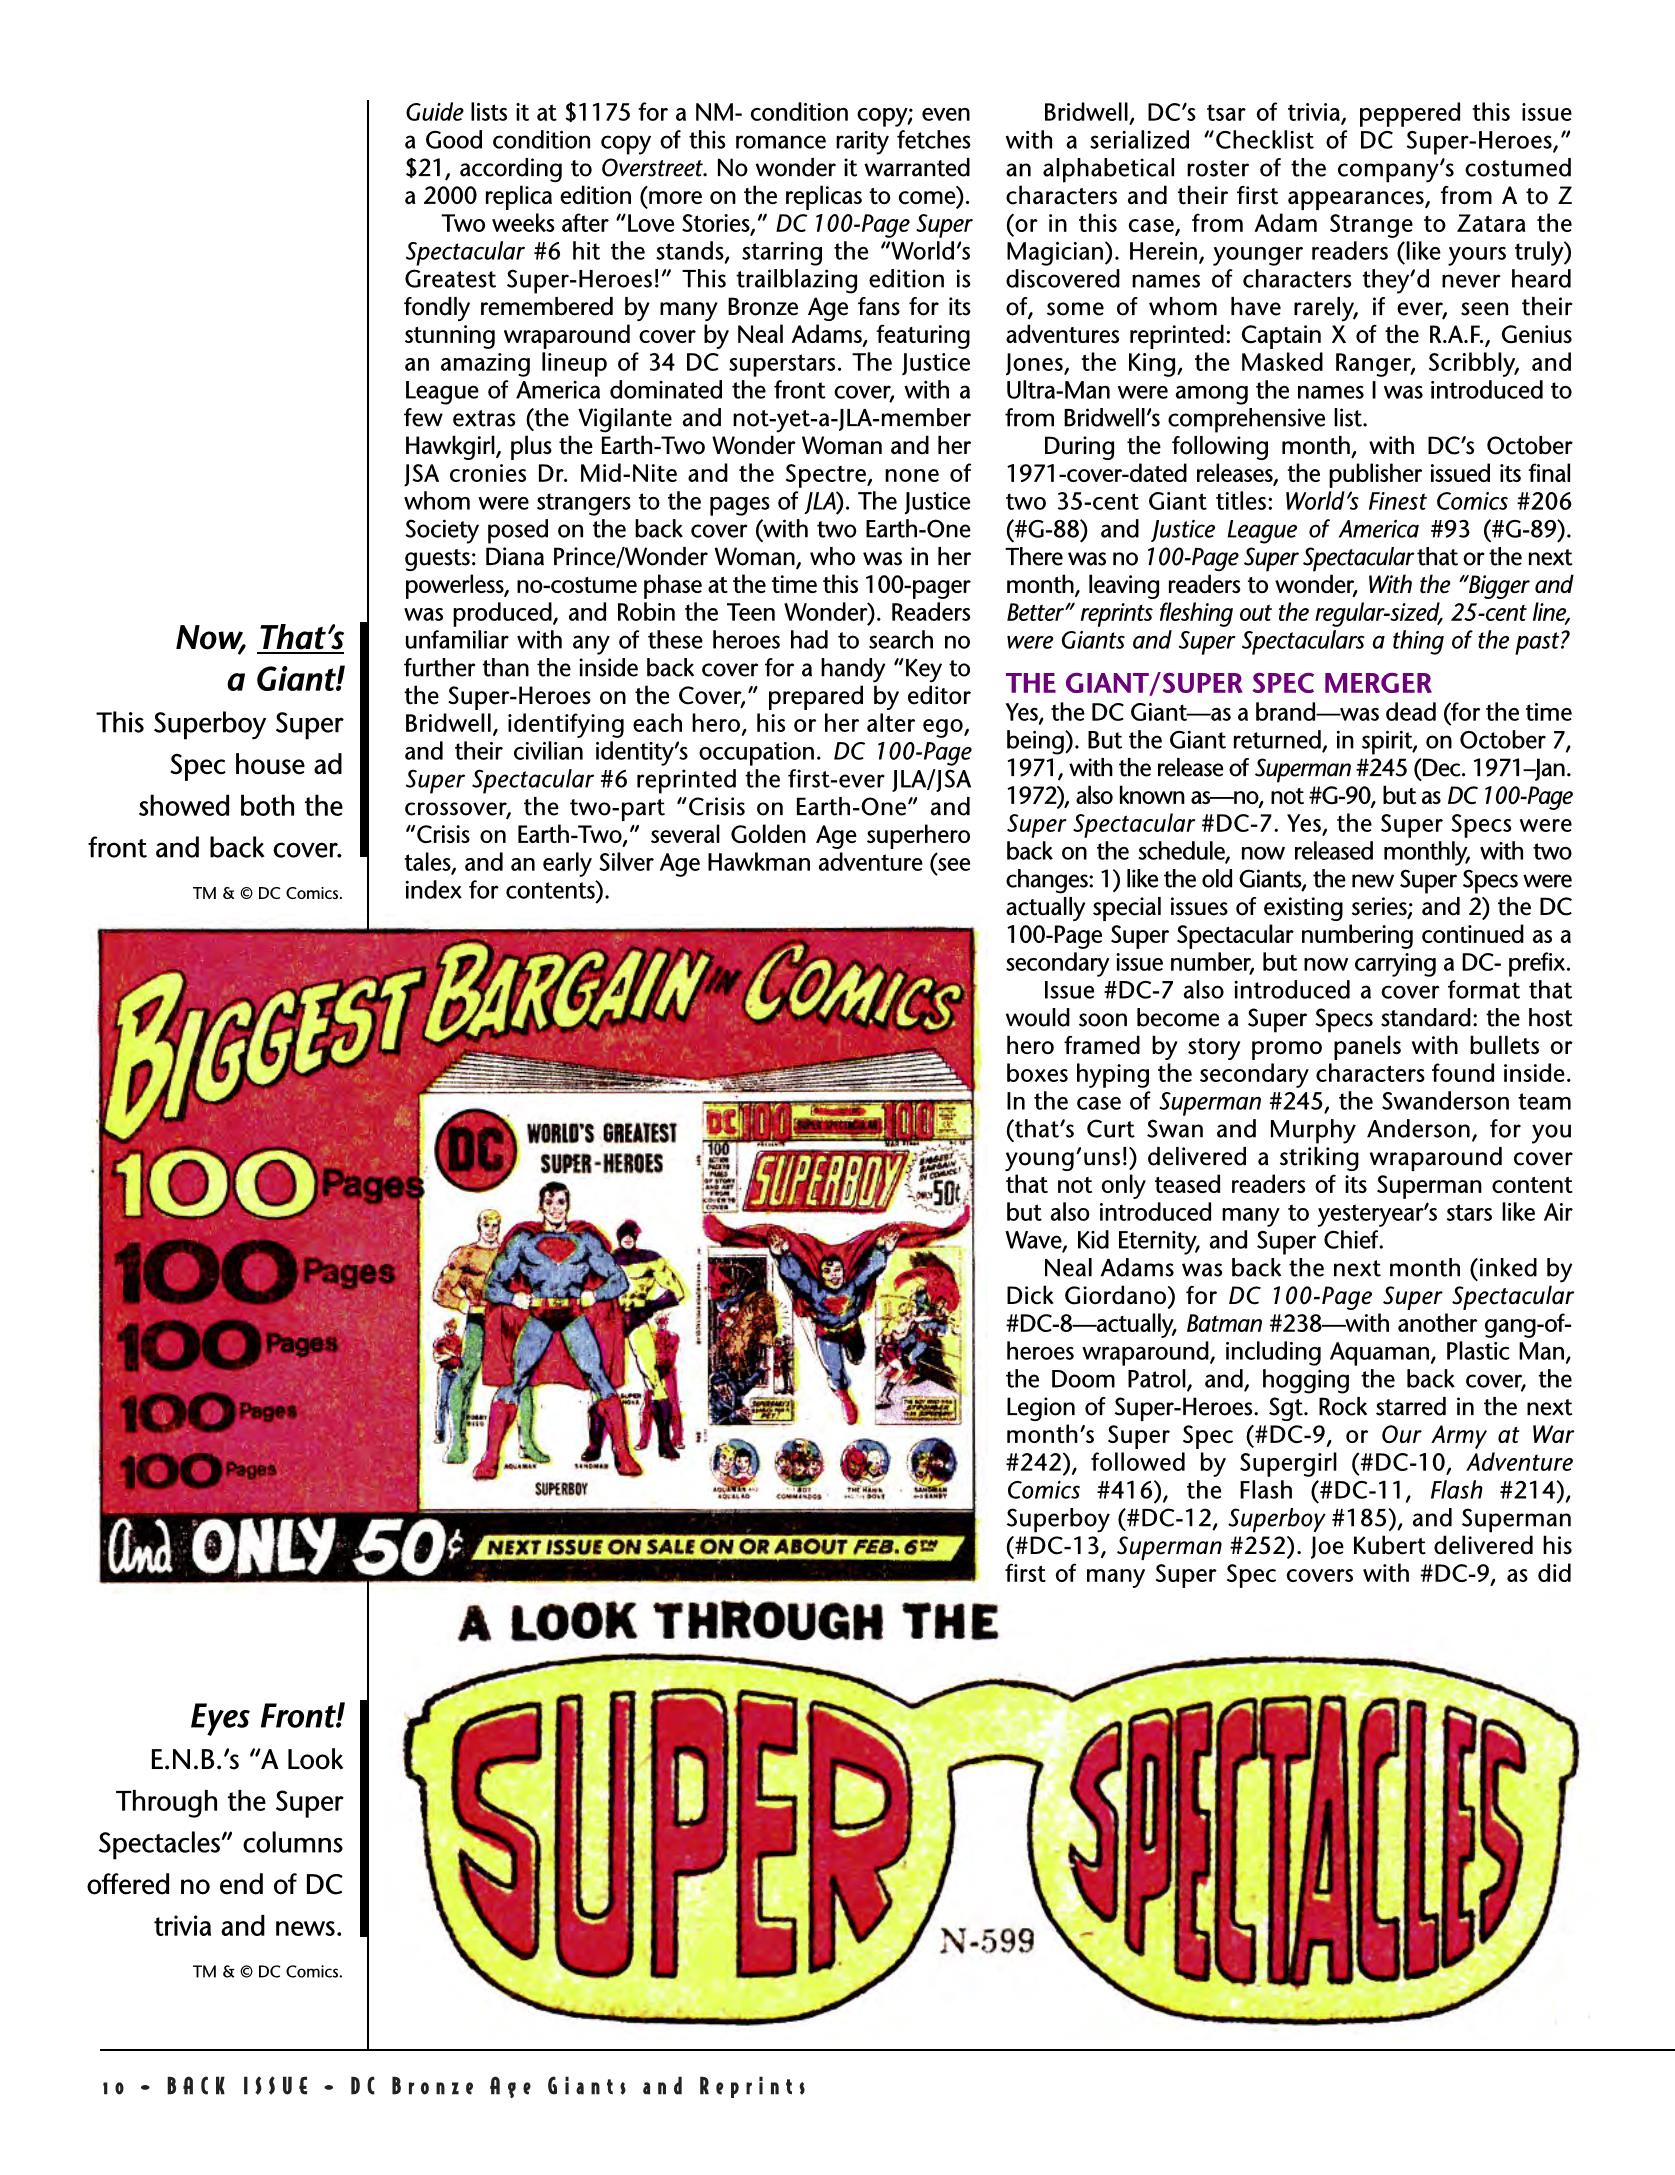 Read online Back Issue comic -  Issue #81 - 14